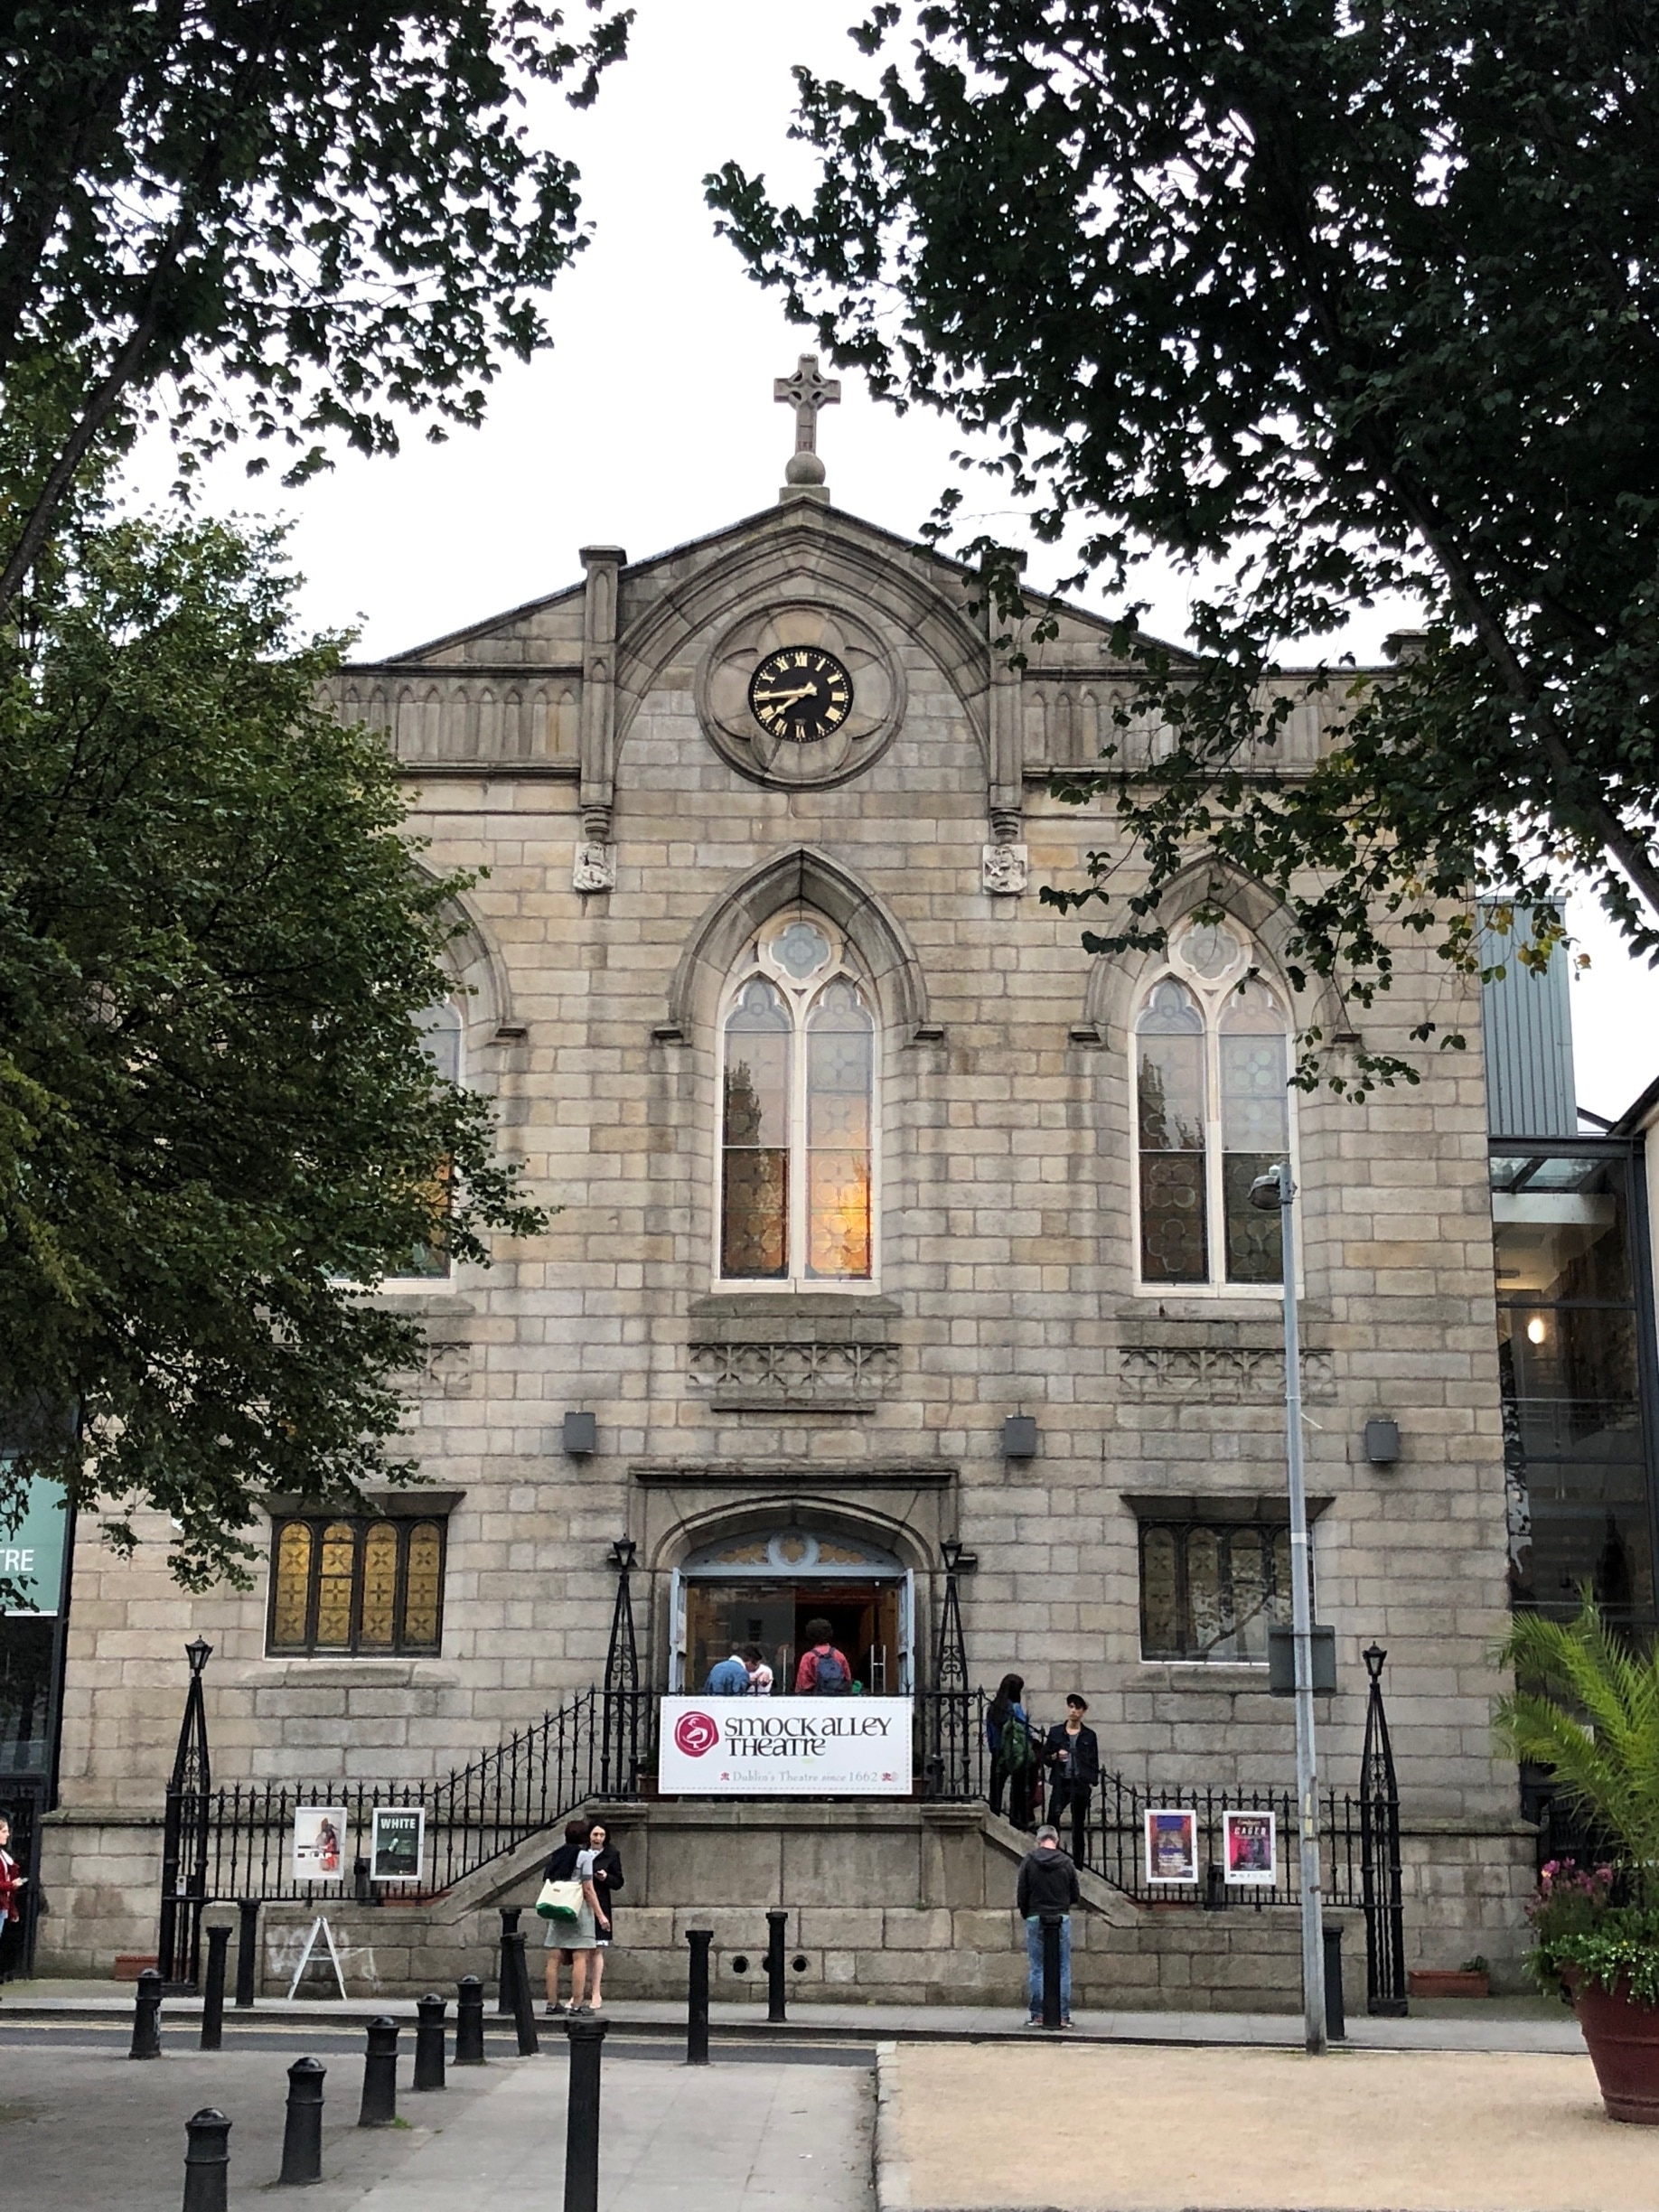 Smock Alley Theater in Dublin’s south side. (09/2018)